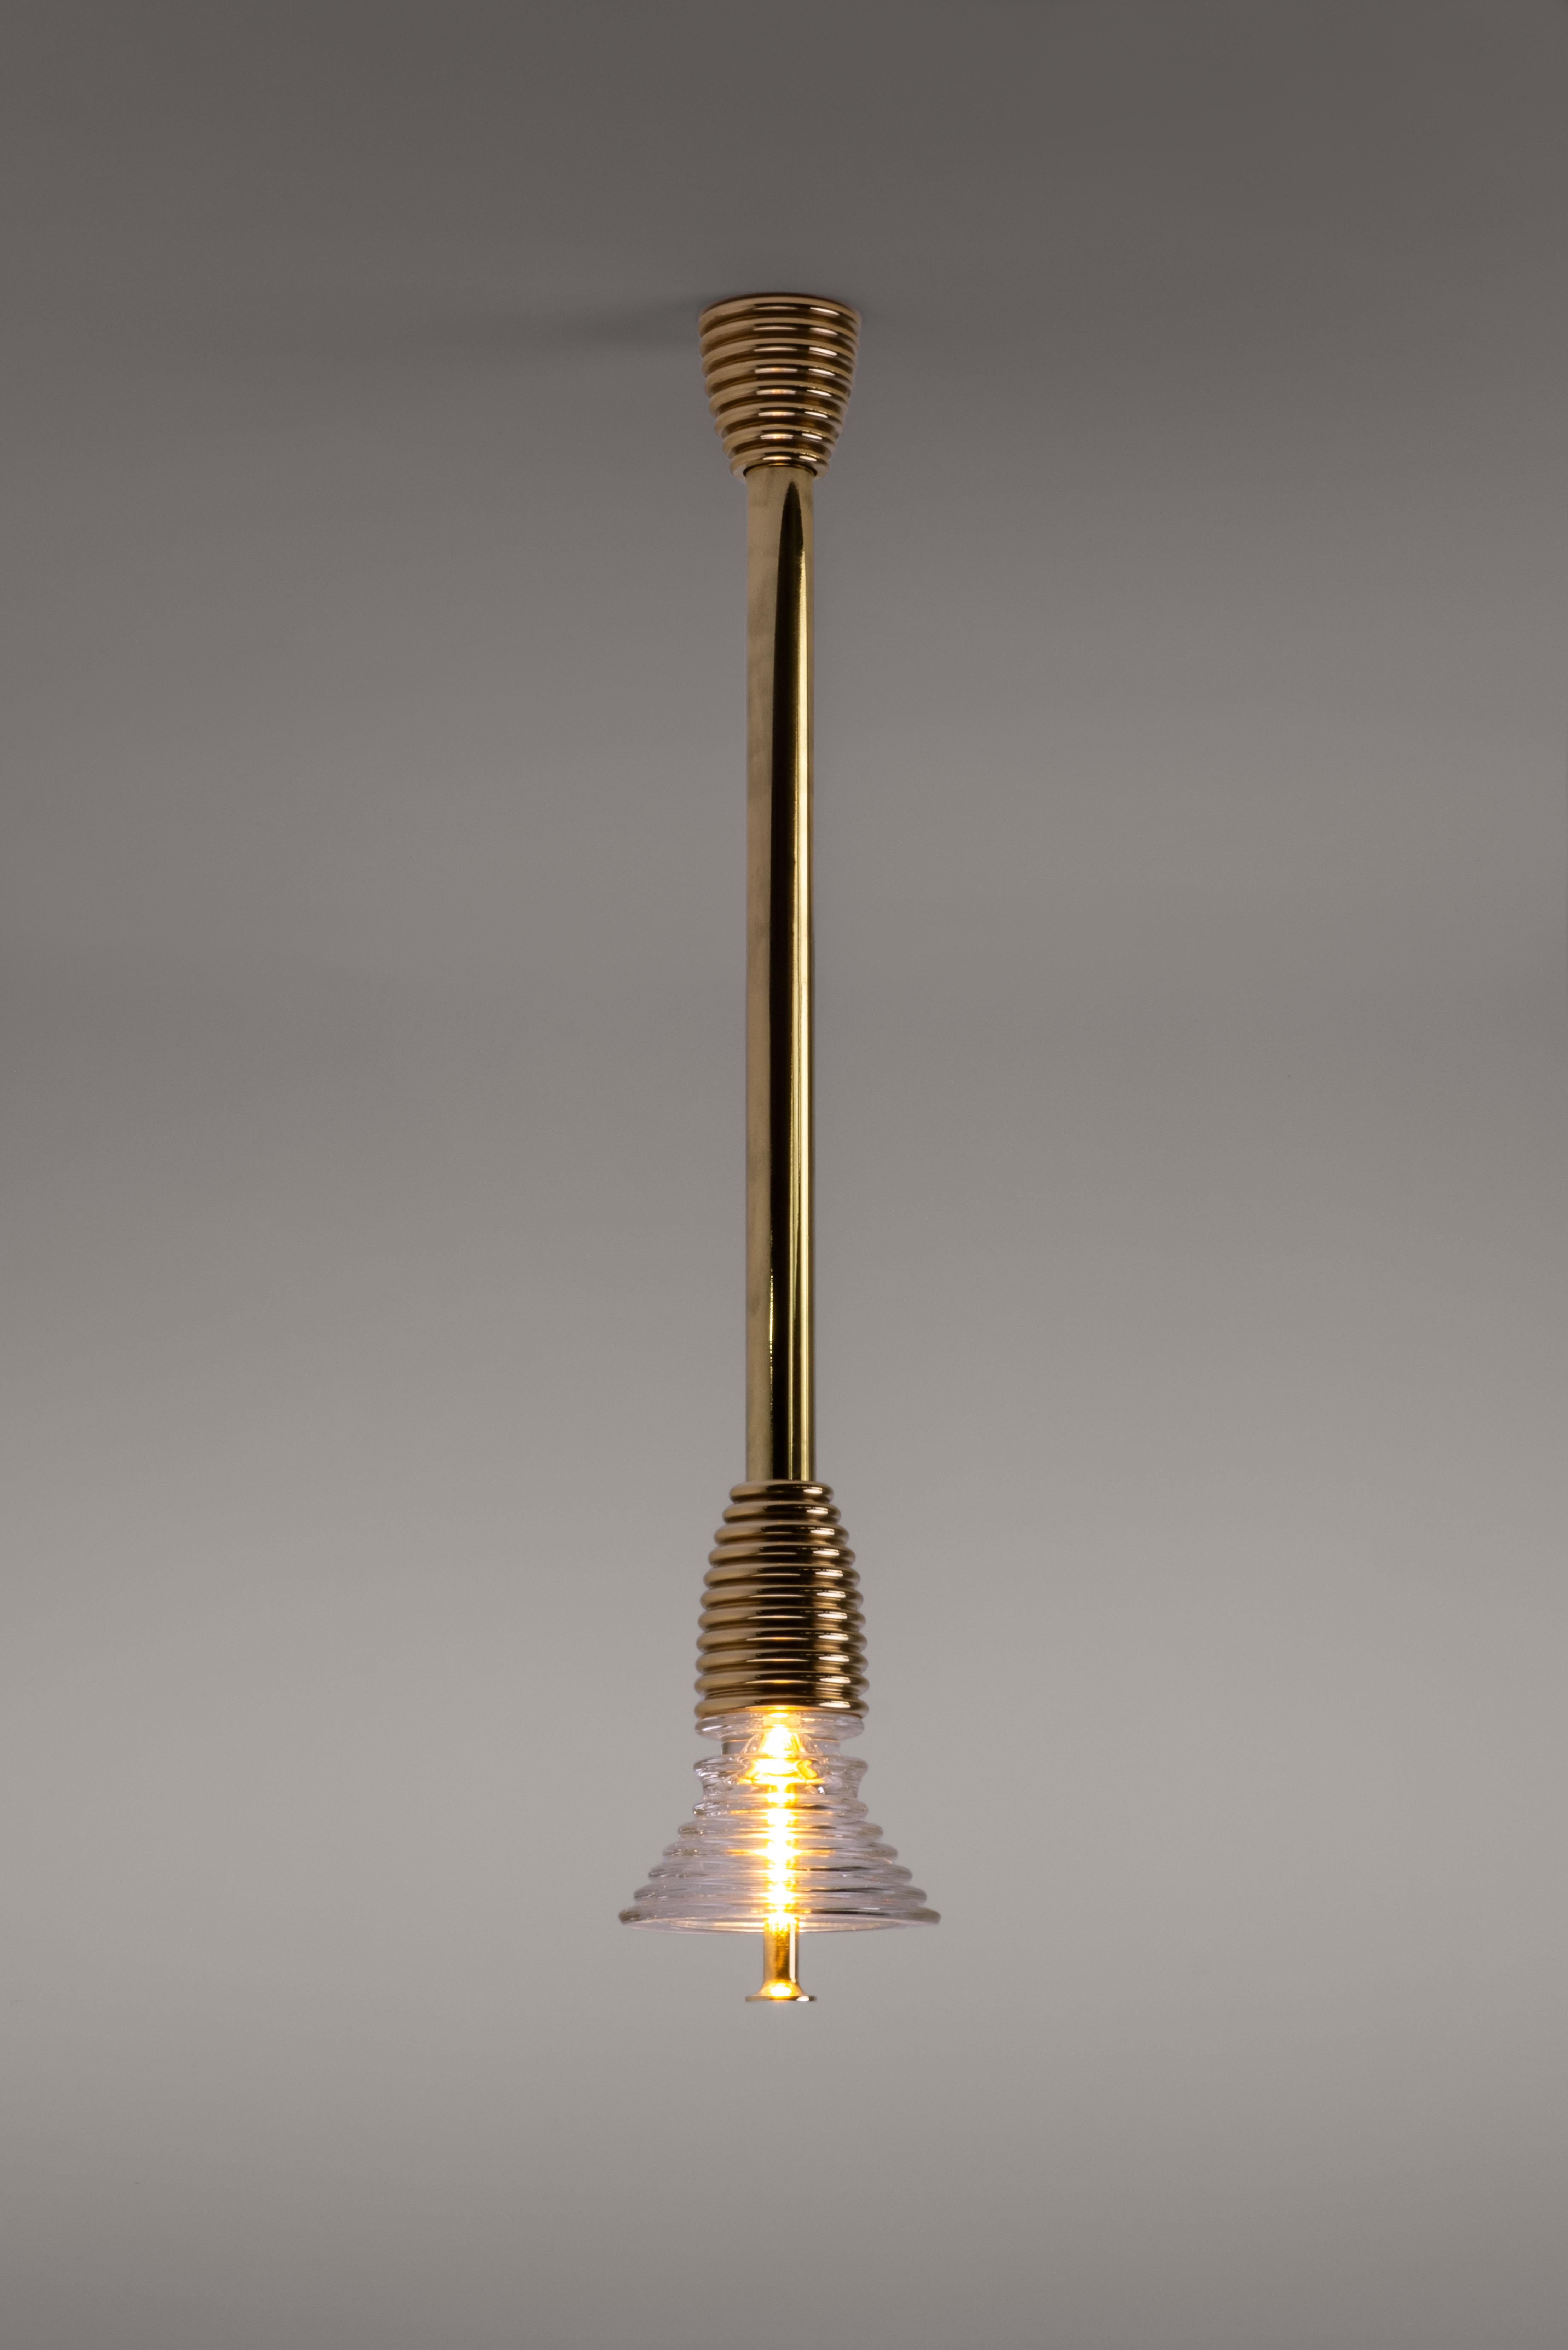 Insulator A Clear Glass and Polished Brass Pendant Light by Novocastrian
Dimensions: Ø 14 x H 21 cm. Rod lenght: 85 or 125 cm.
Materials: Clear glass and polished brass.  

All products are available in custom dimensions and finishes. Rods can be